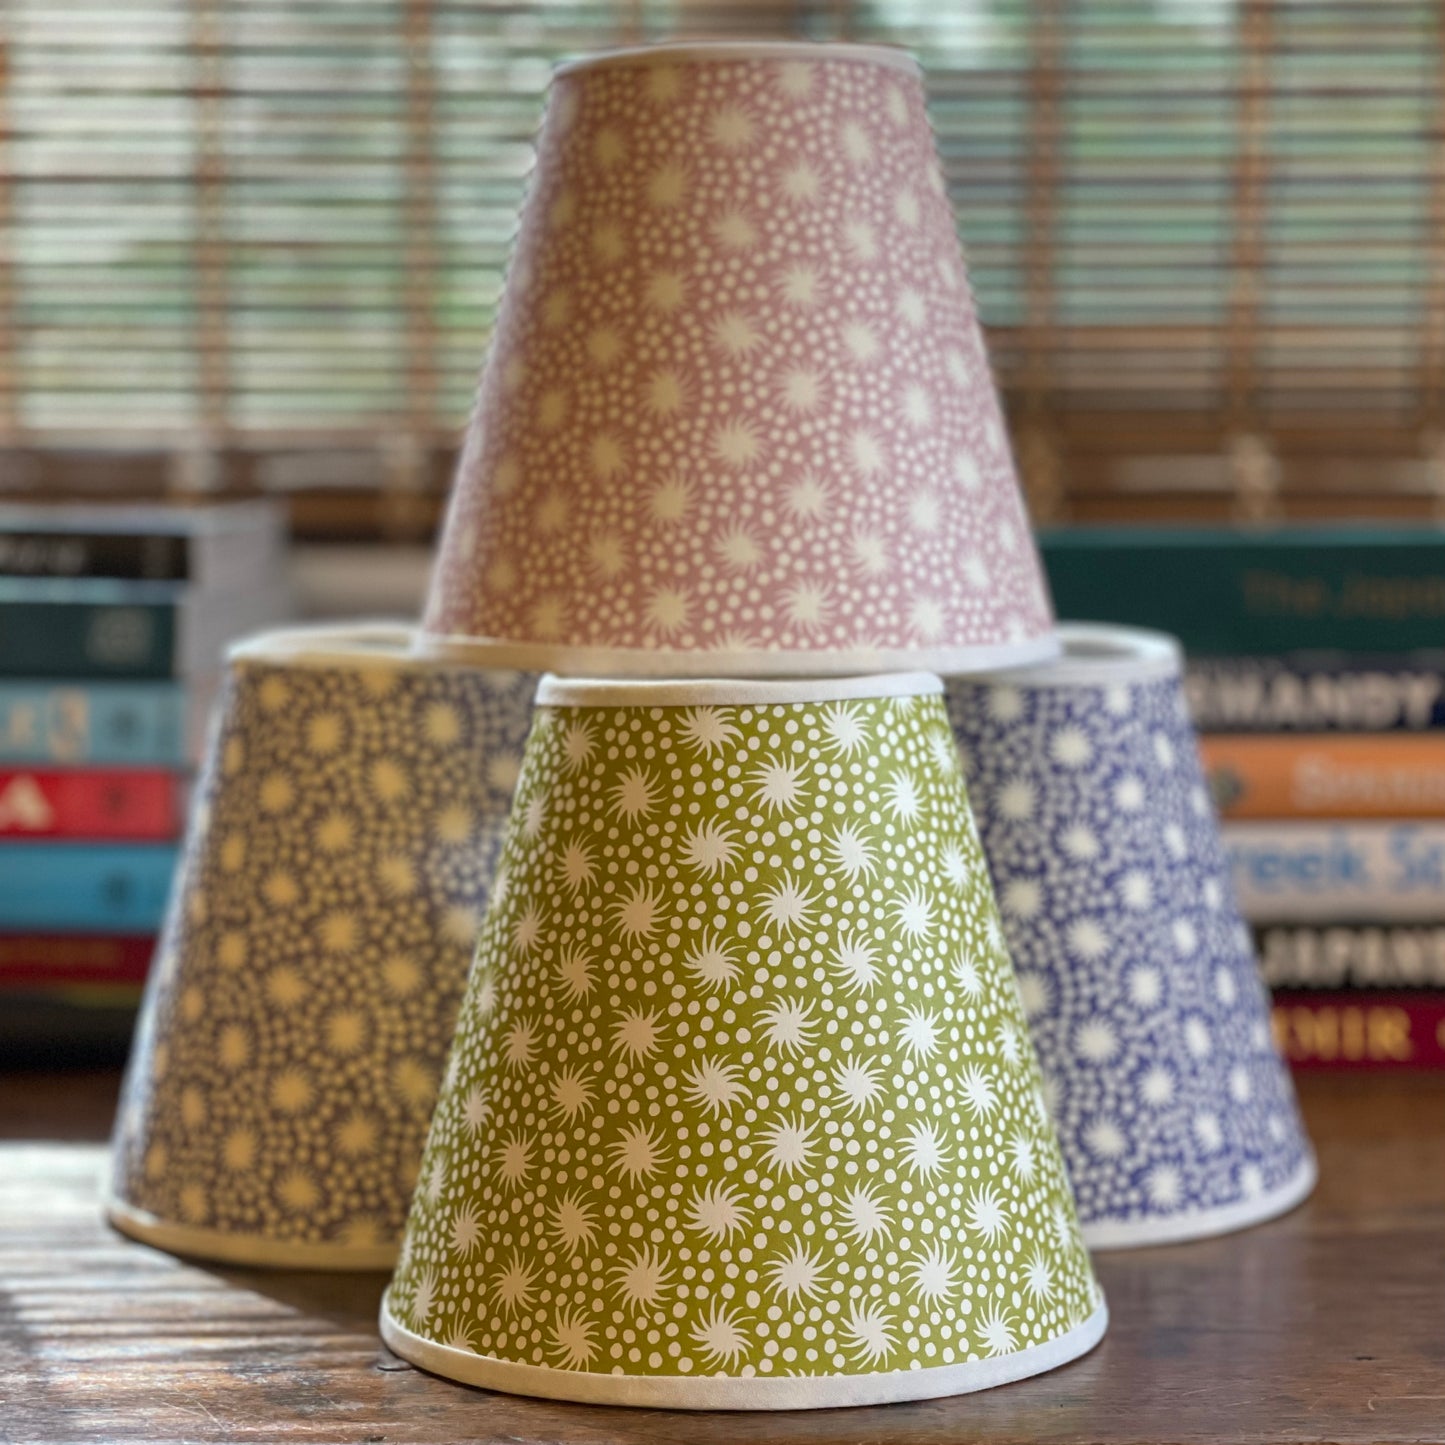 Small Clip-On Lampshade. Patterned Paper from England. "Animalcules" Cupboard Pink. White Trim.